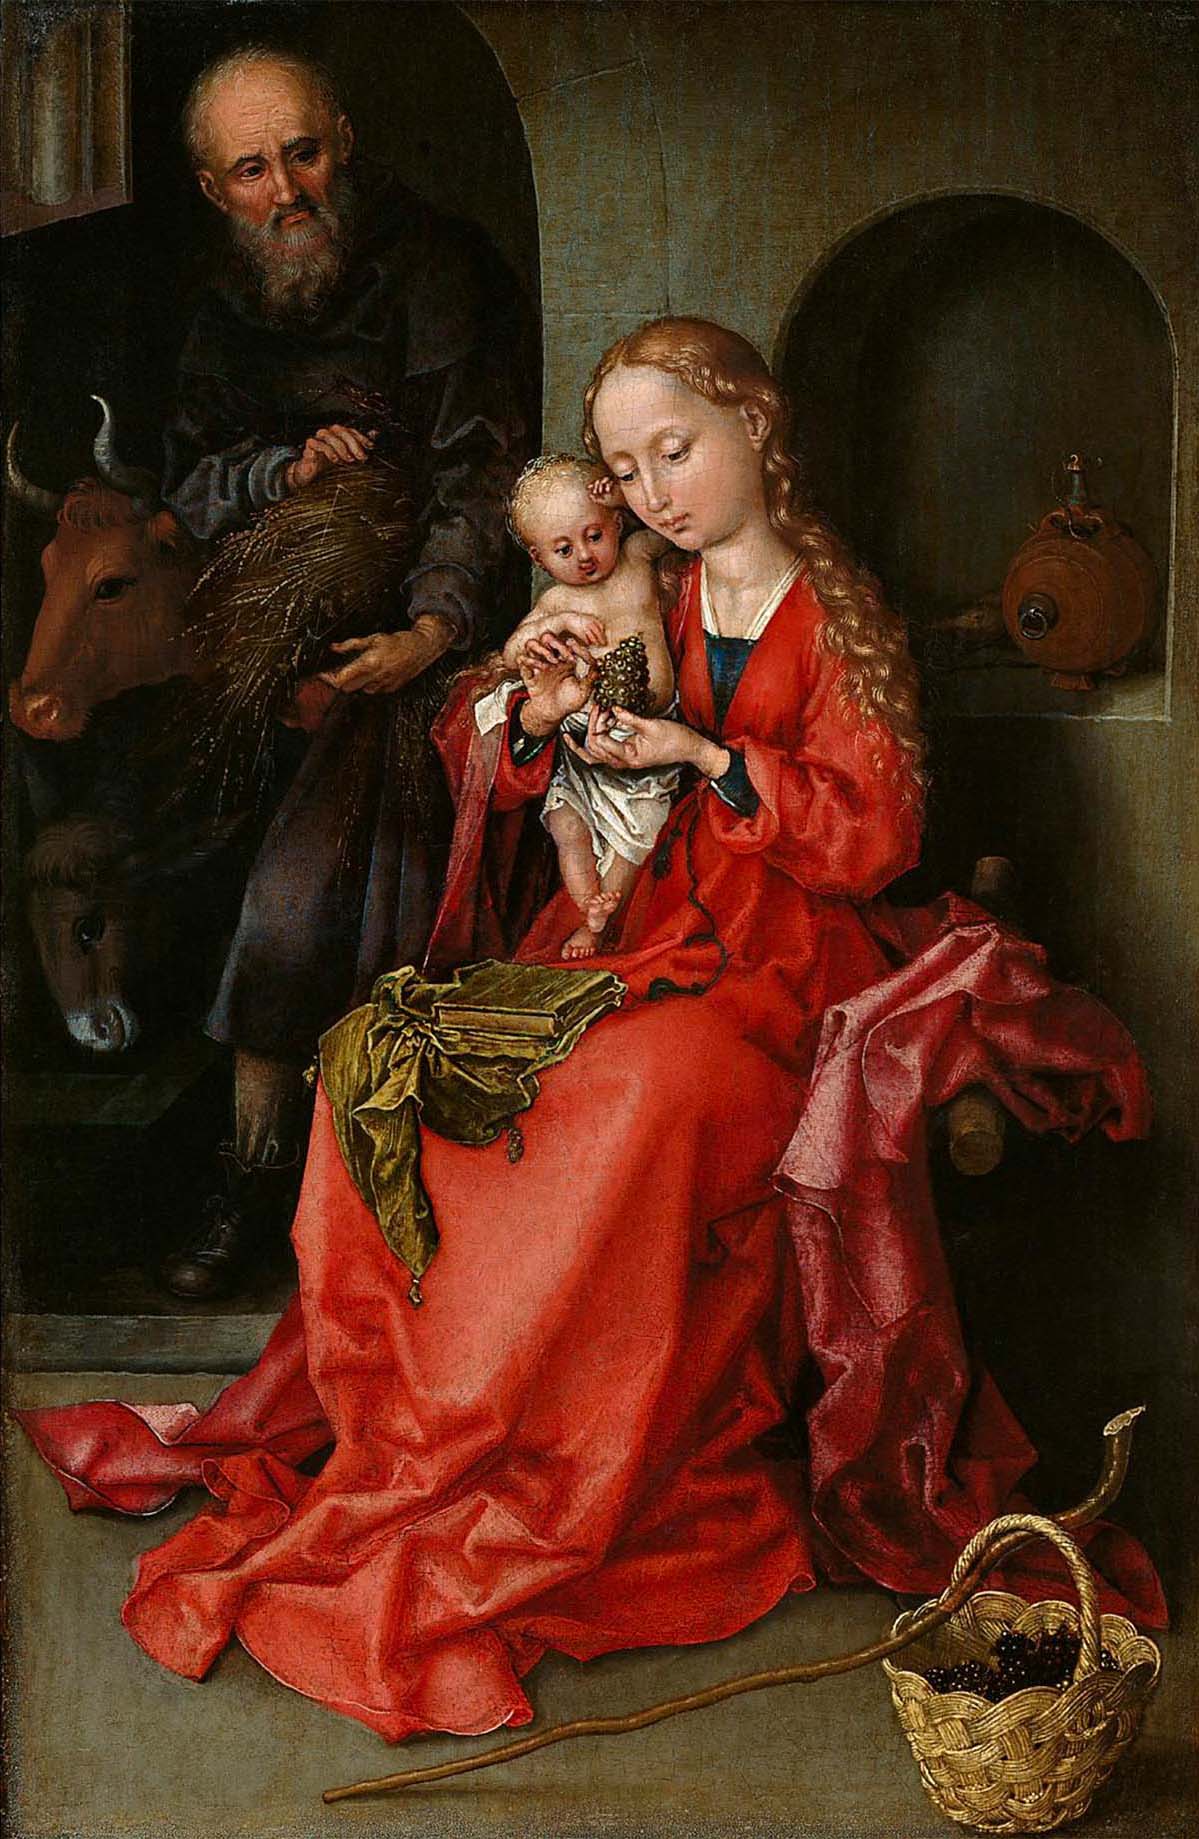 The Holy Family, a painting from around 1480/1490 by Martin Schongauer (around 1440/45 Colmar - 1491 Breisach), Kunsthistorischen Museum Wien (Vienna).<br/>Painting suggested to me by website subscriber Jennifer.